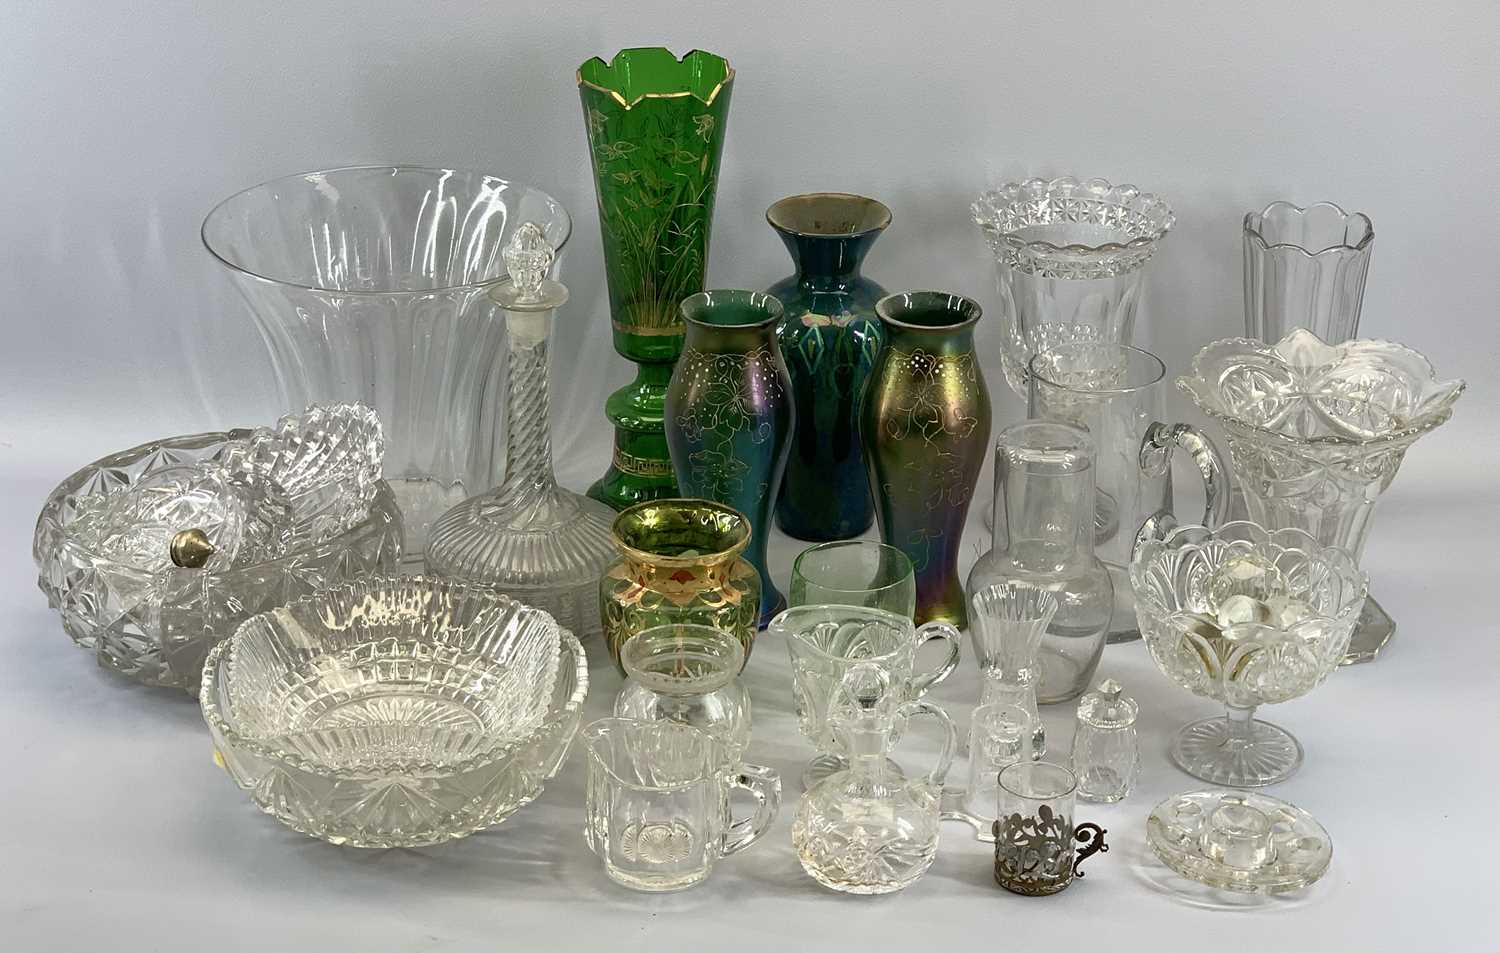 GLASSWARE - Loetz type iridescent vases, a pair, 23cms tall, and other assorted and interesting